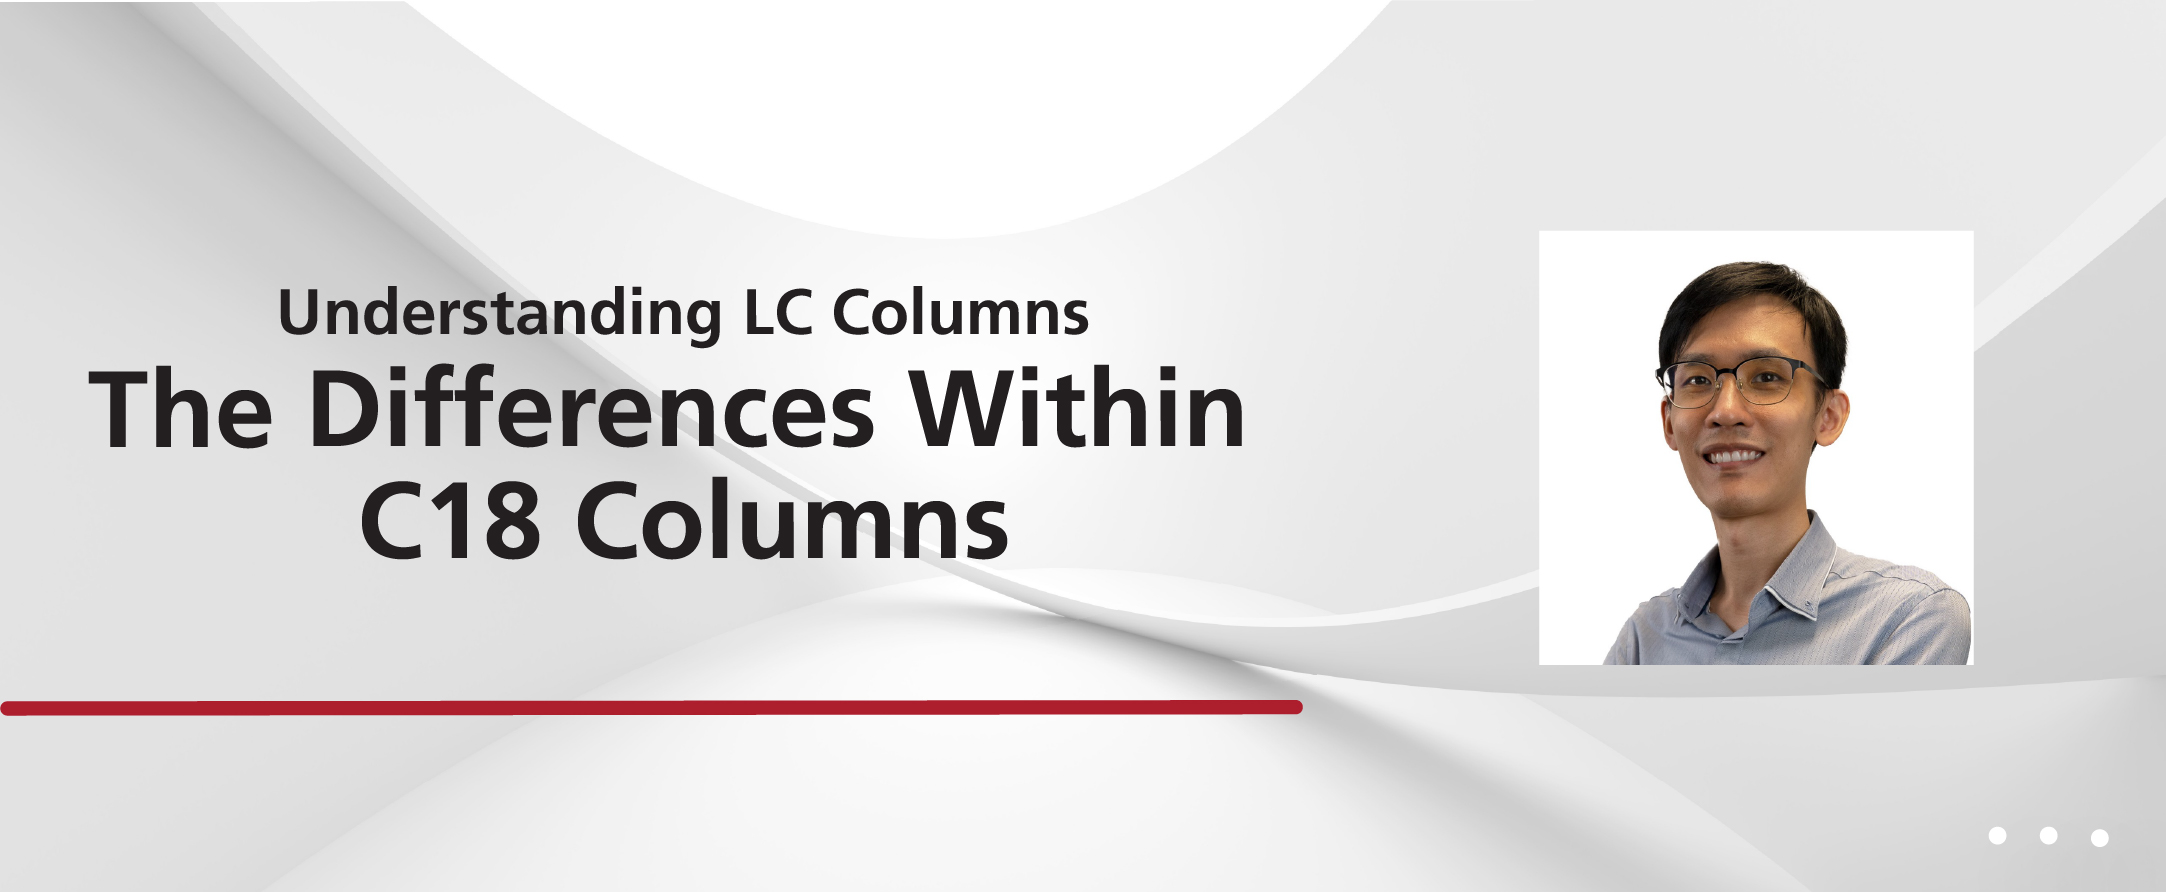 Understanding LC Columns, The Differences Within C18 Columns